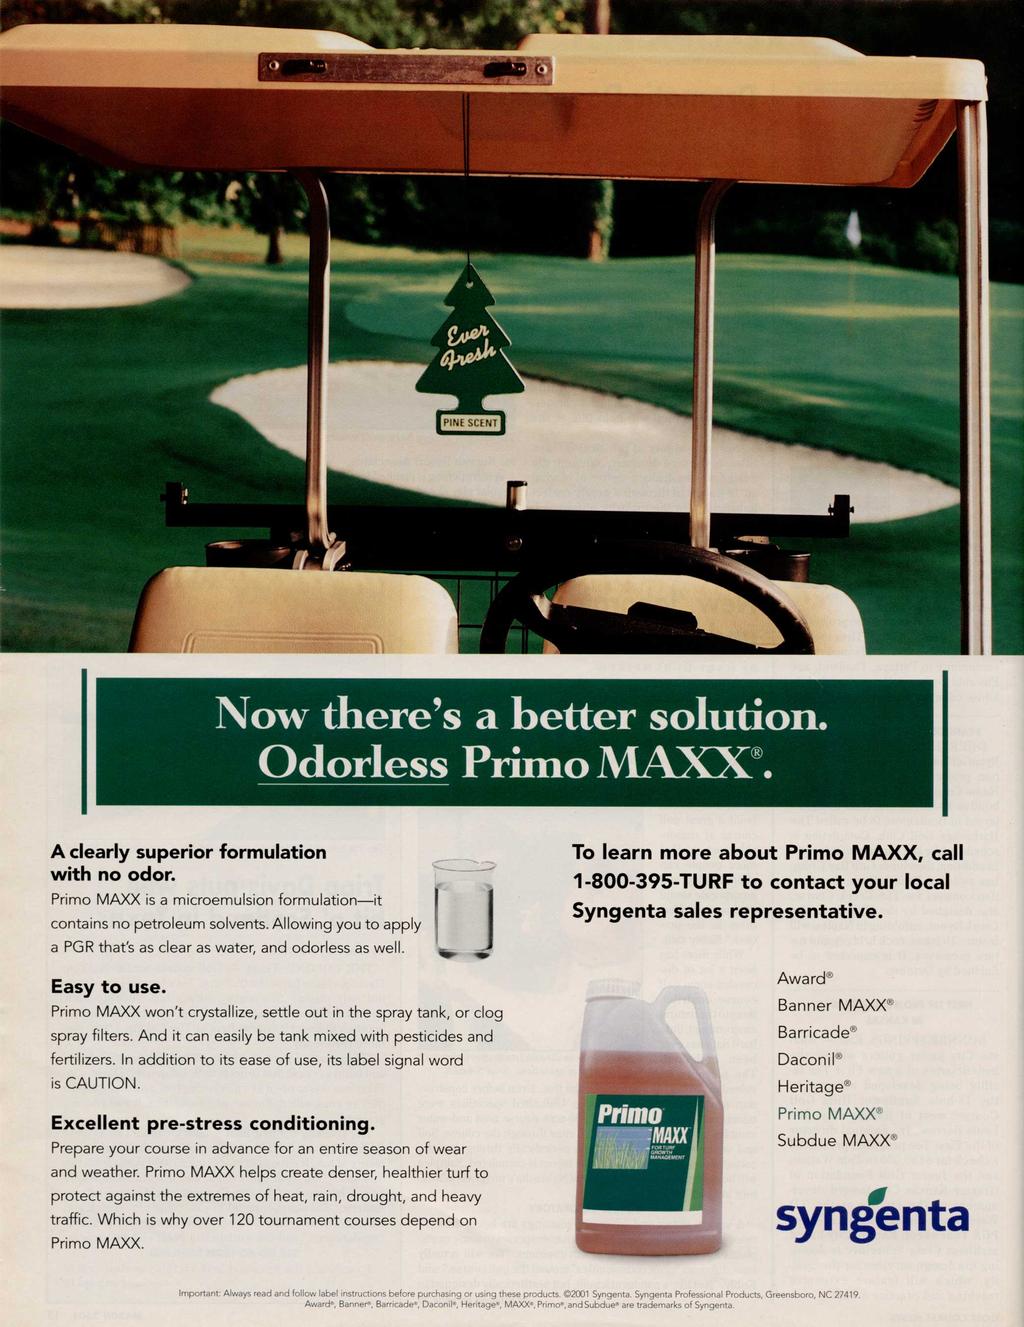 Now there's a better solution. Odorless Primo MAXX. A clearly superior formulation with no odor. Primo MAXX is a microemulsion formulation it contains no petroleum solvents.